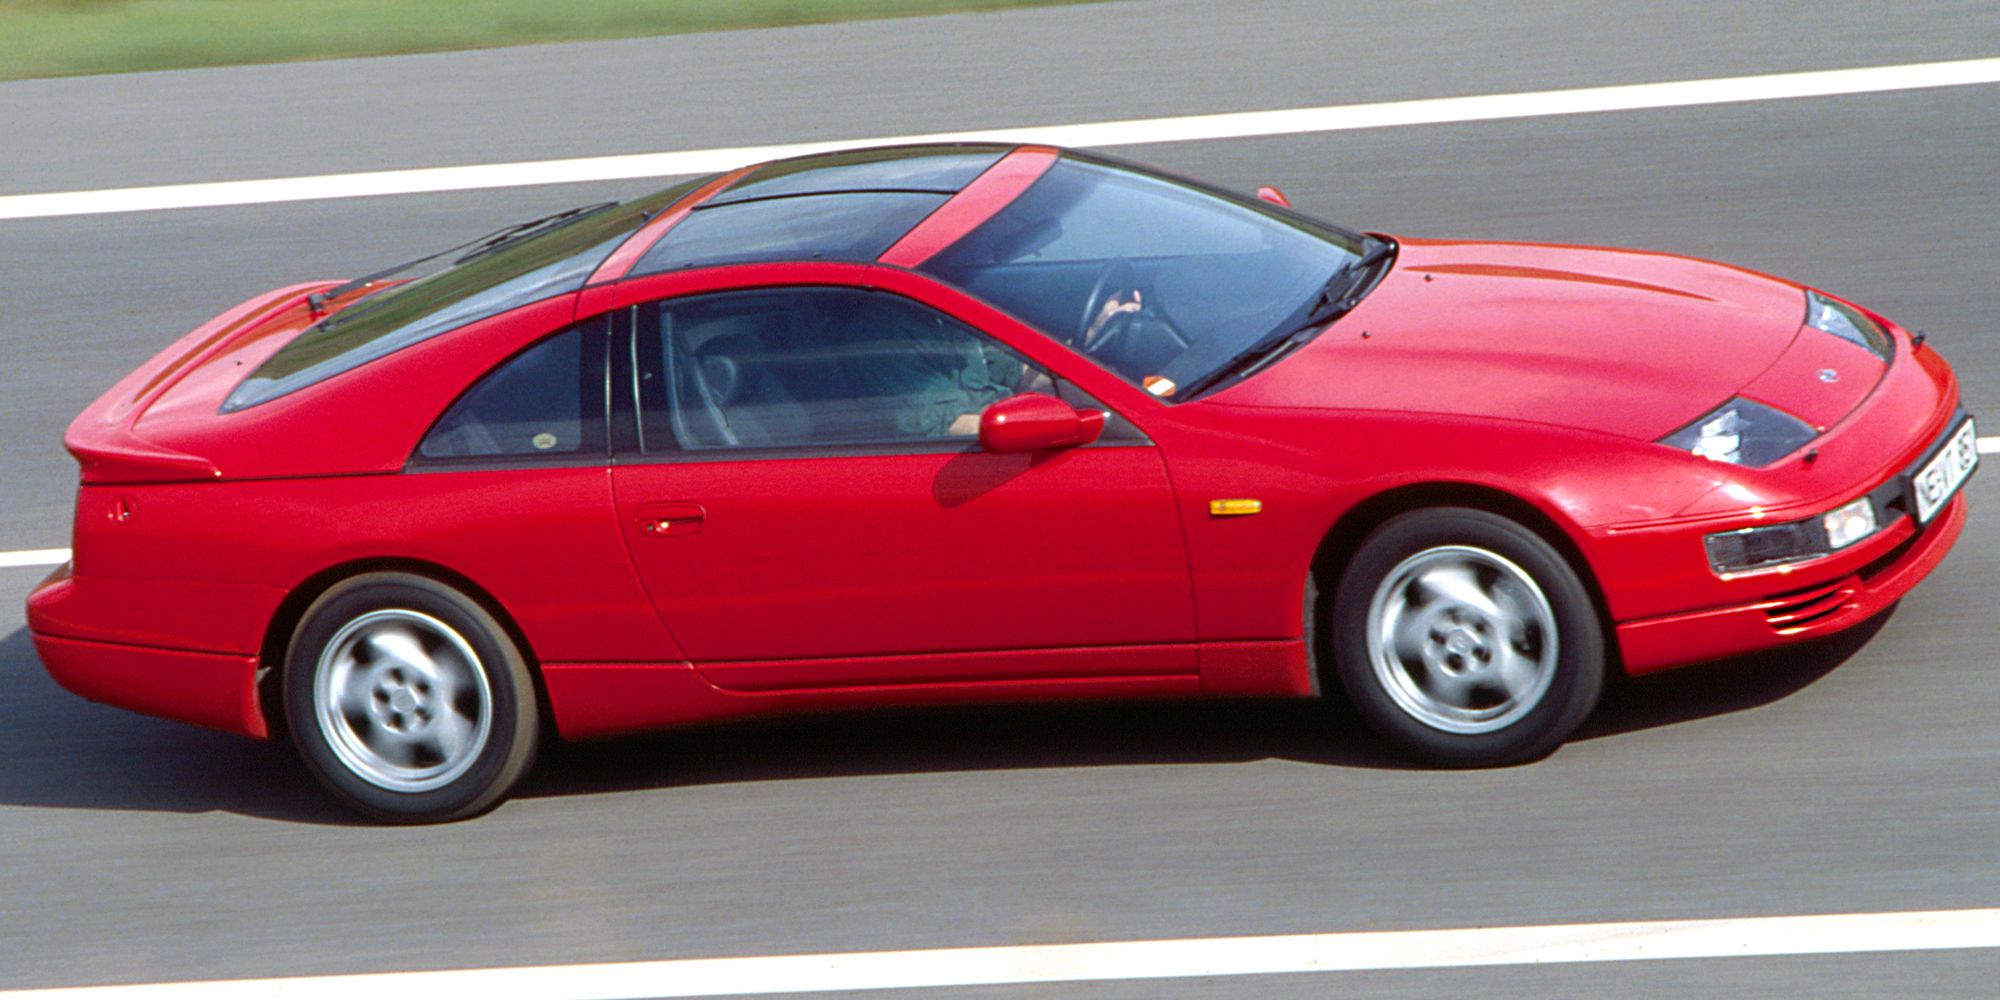 The side of the 300ZX on the move